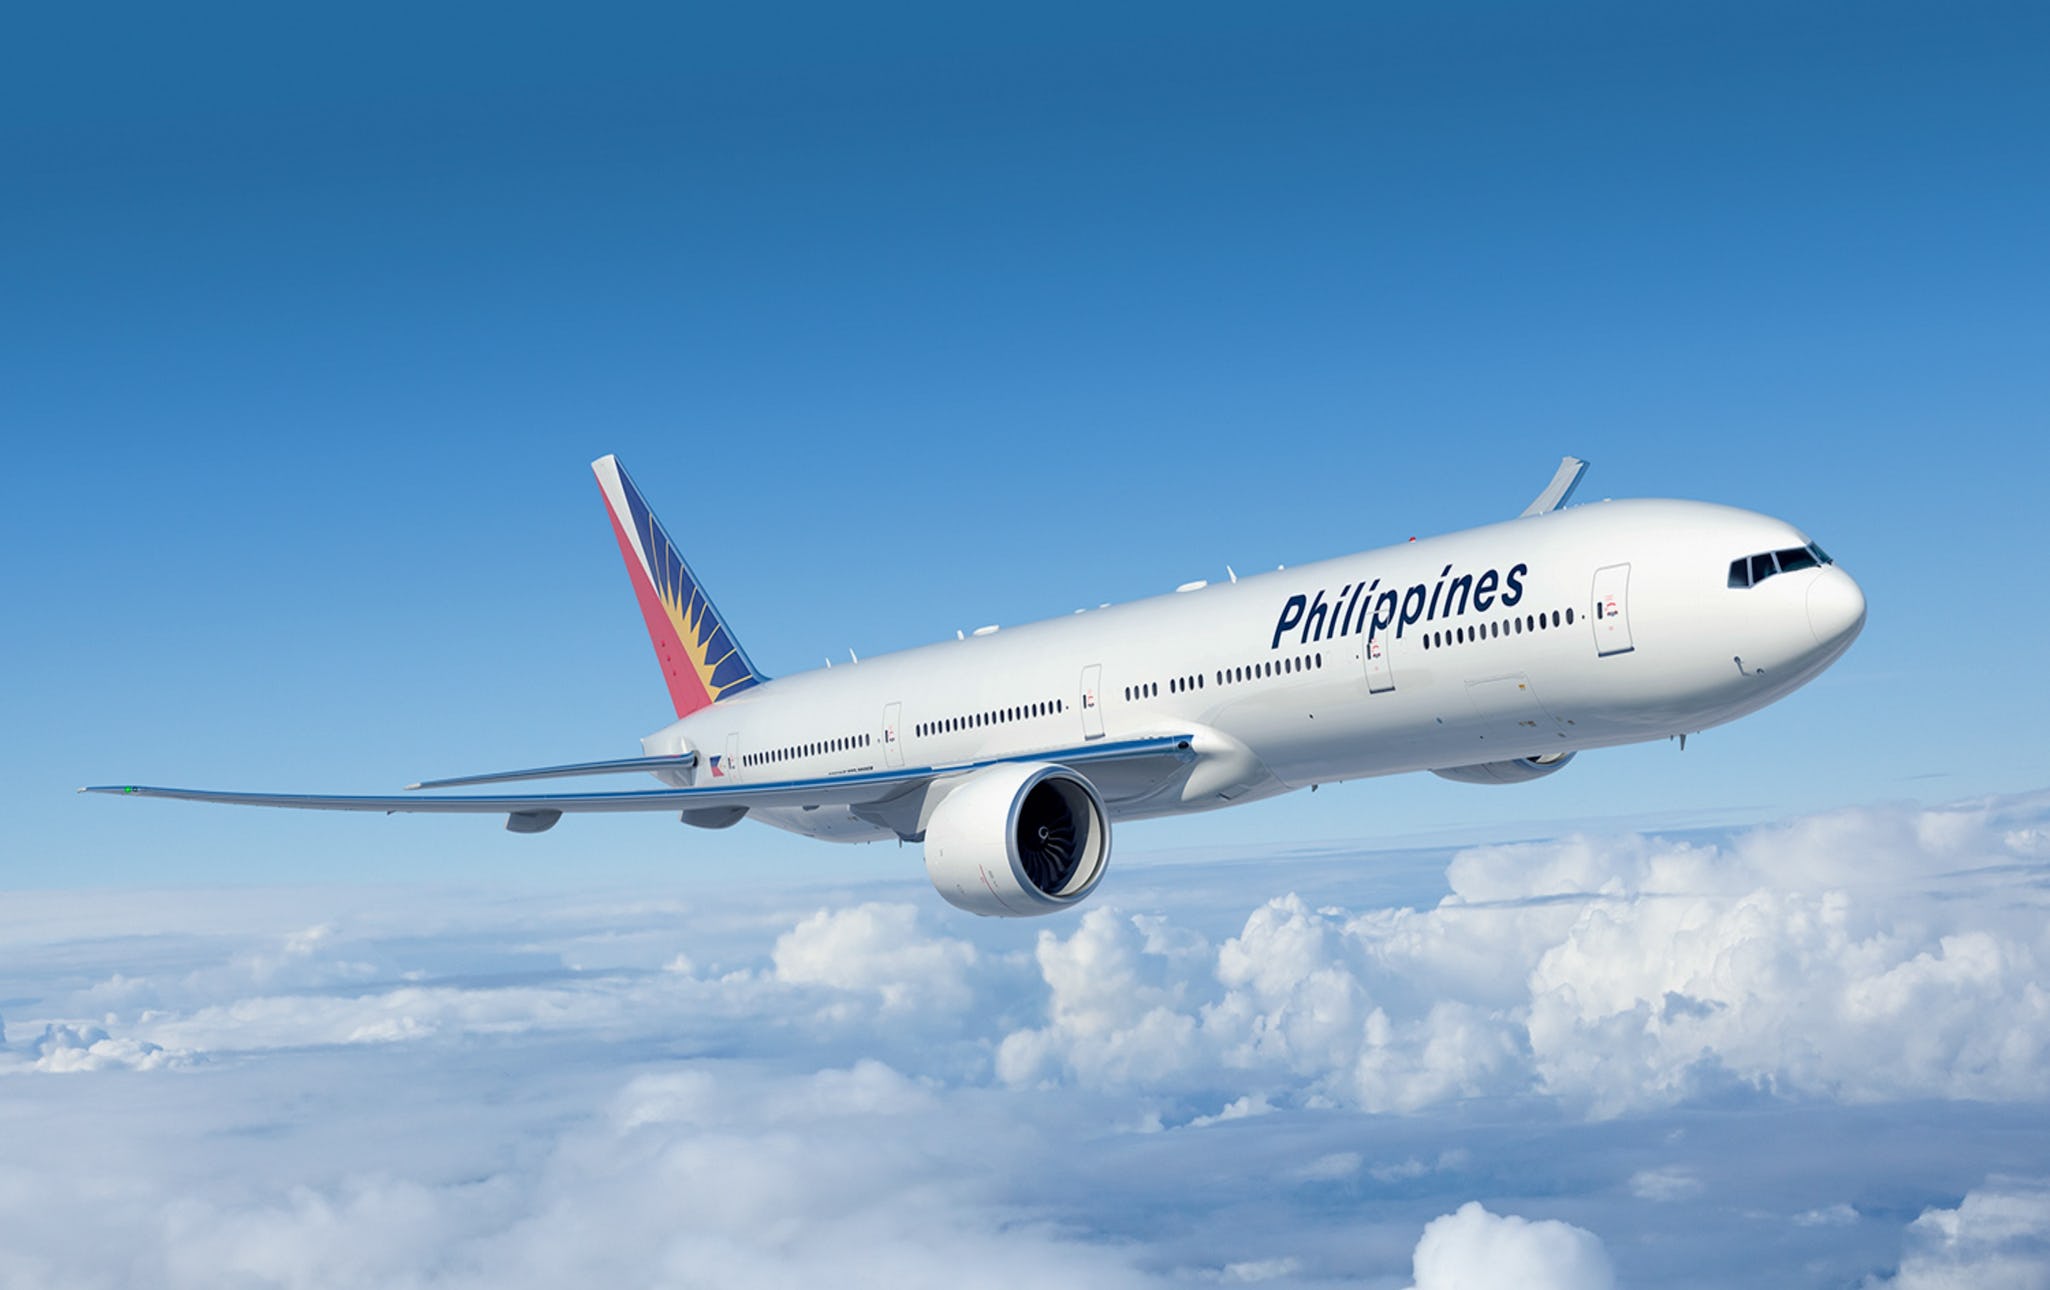 Boeing Aircraft of Philippine Airlines